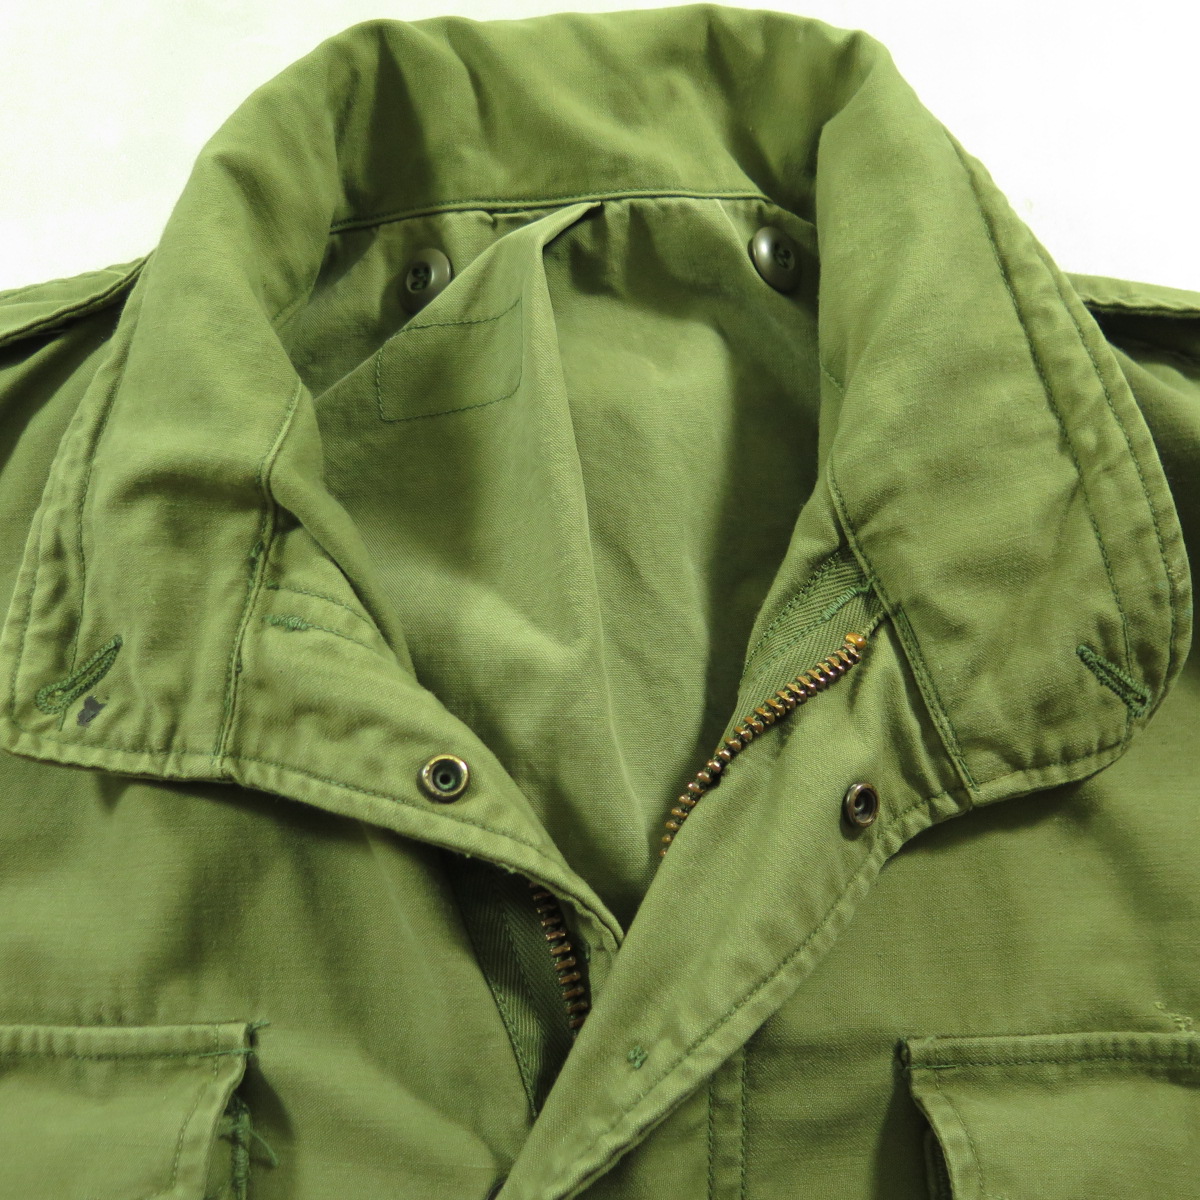 Vintage 60s M-65 US Army Field Jacket Large Military OG-107 Green | The ...